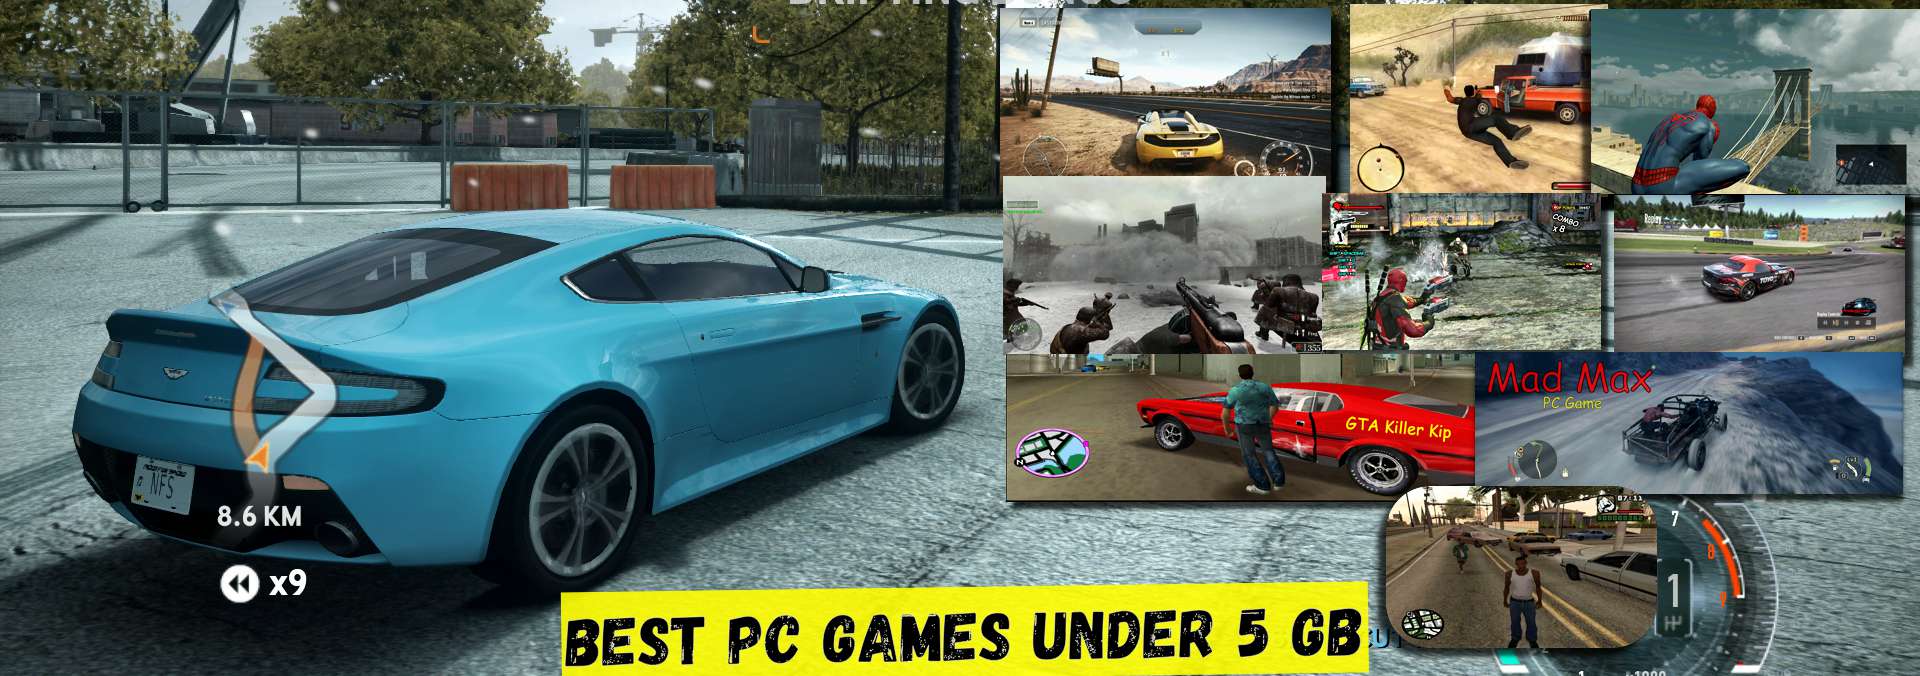 Best pc games under 5GB – Full collection with the download link